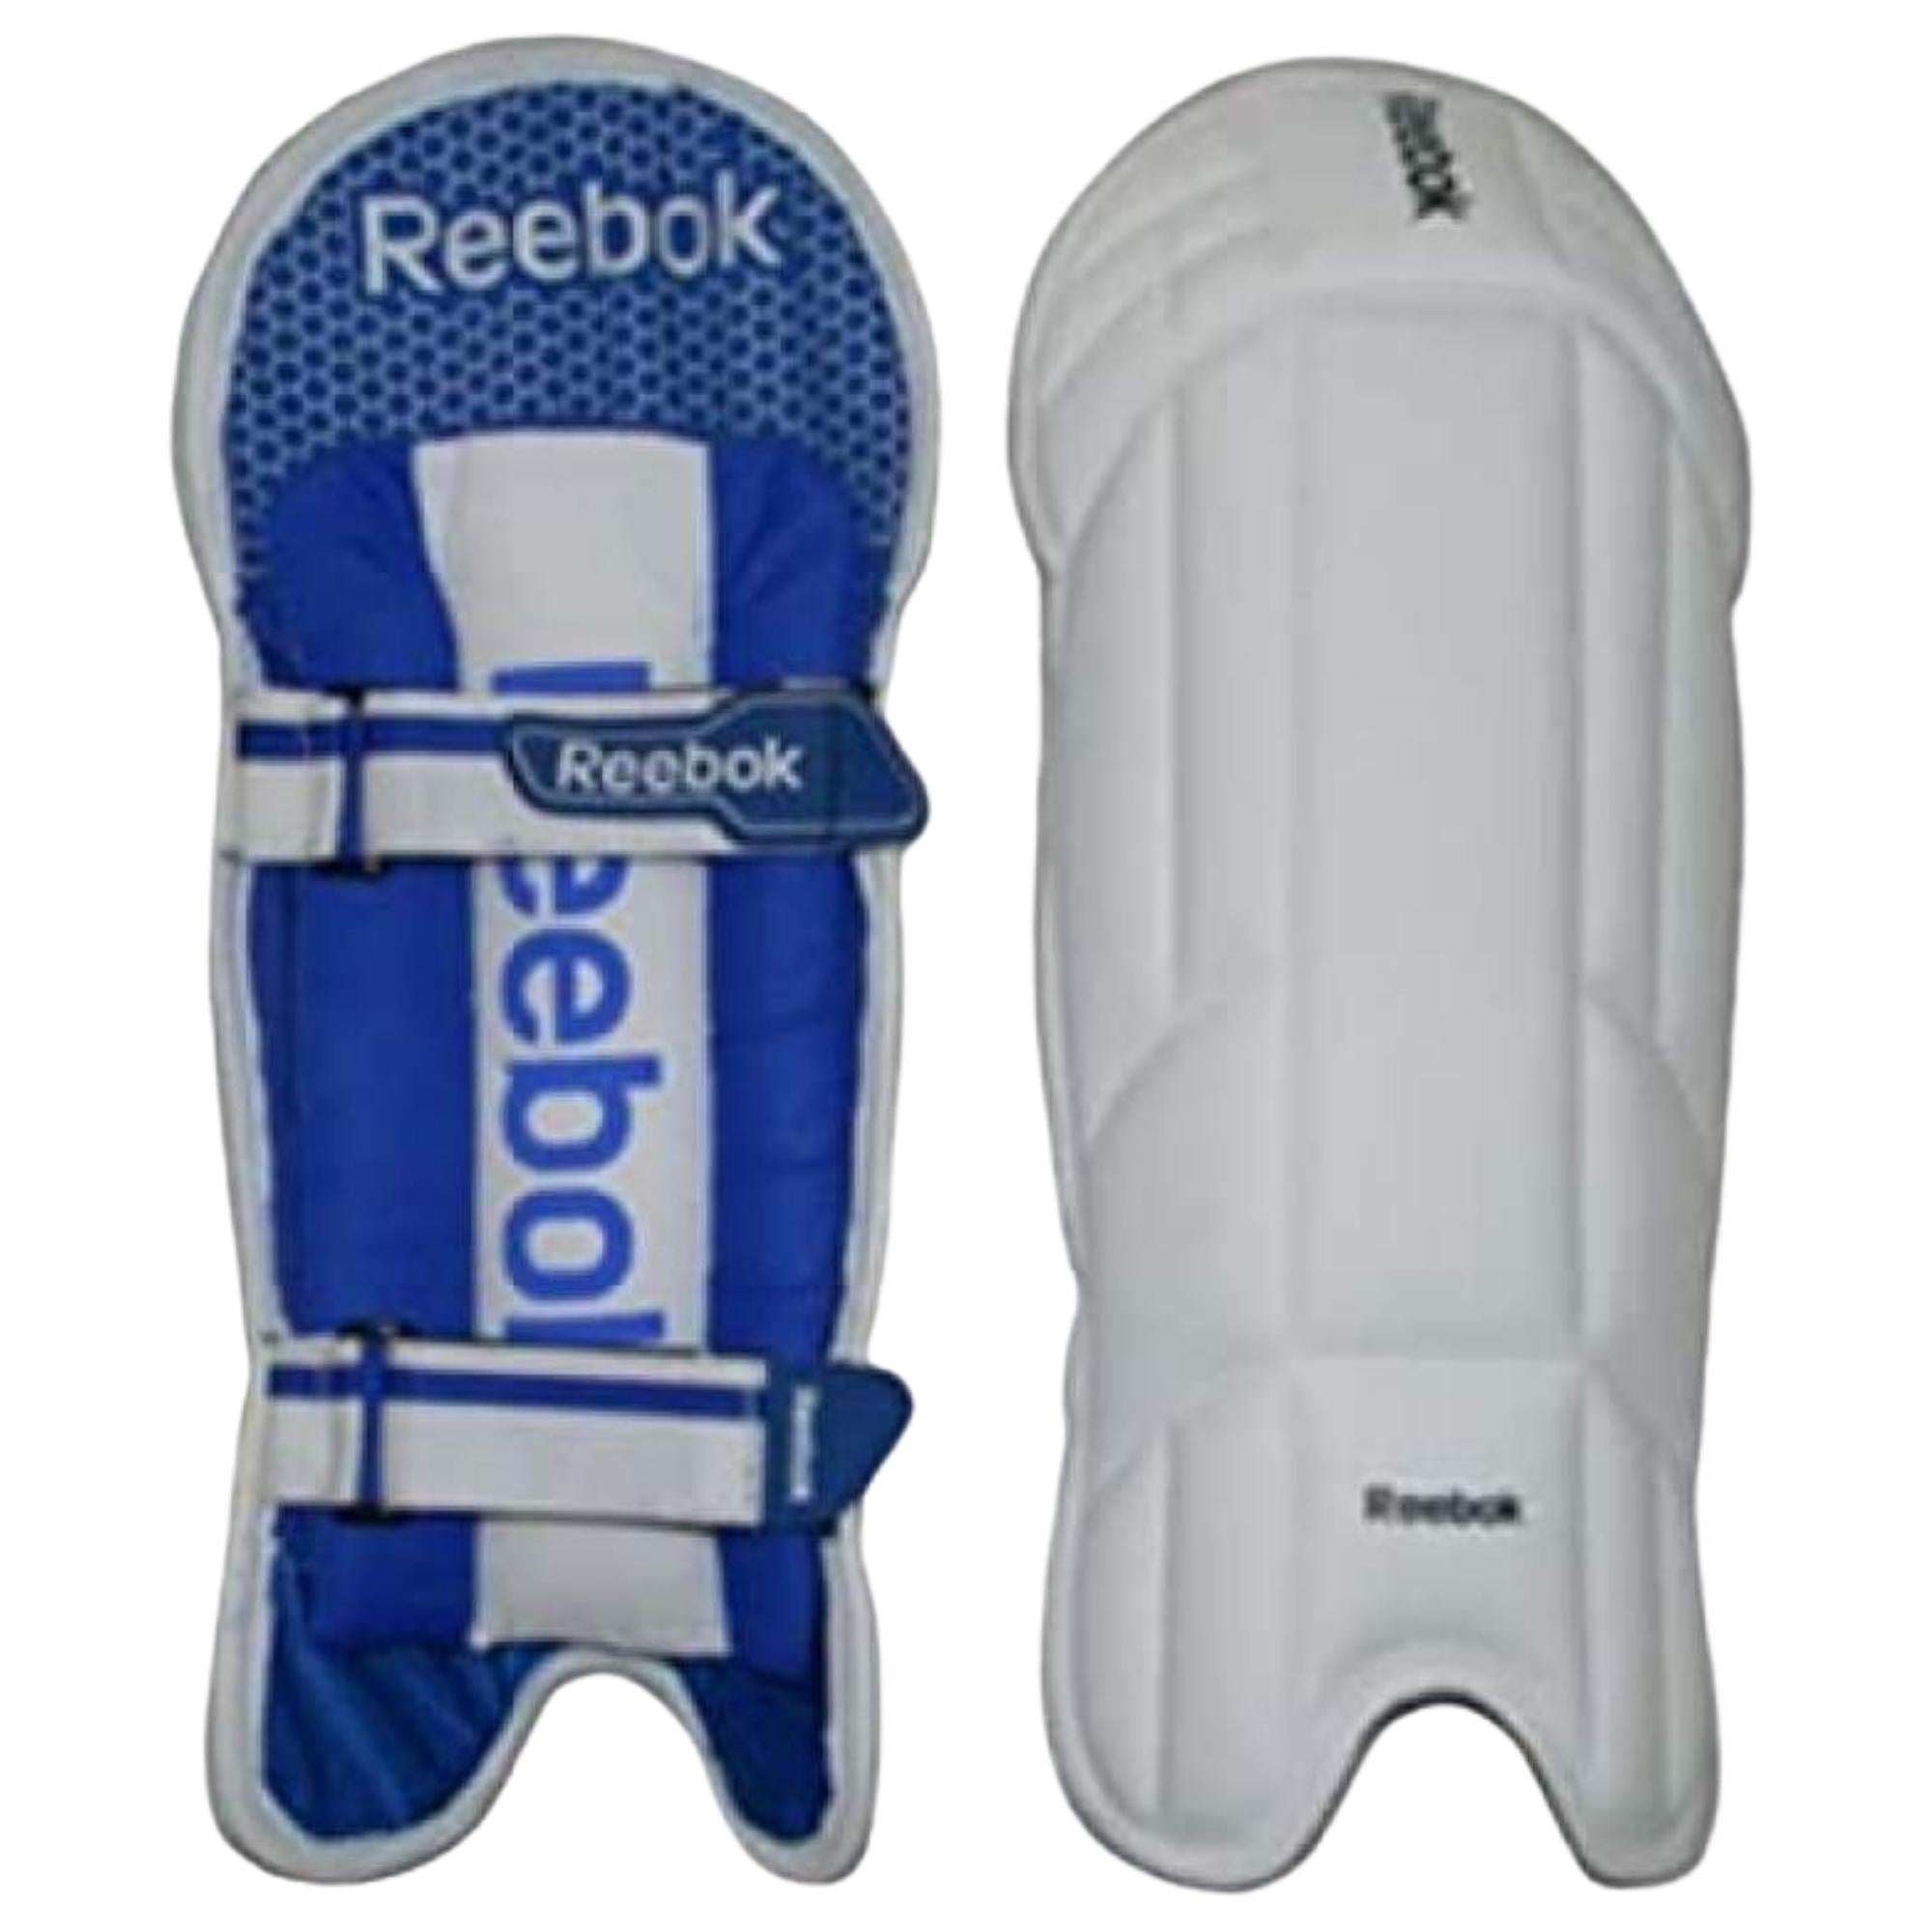 Reebok Wicket Keeping Pads Limited Edition